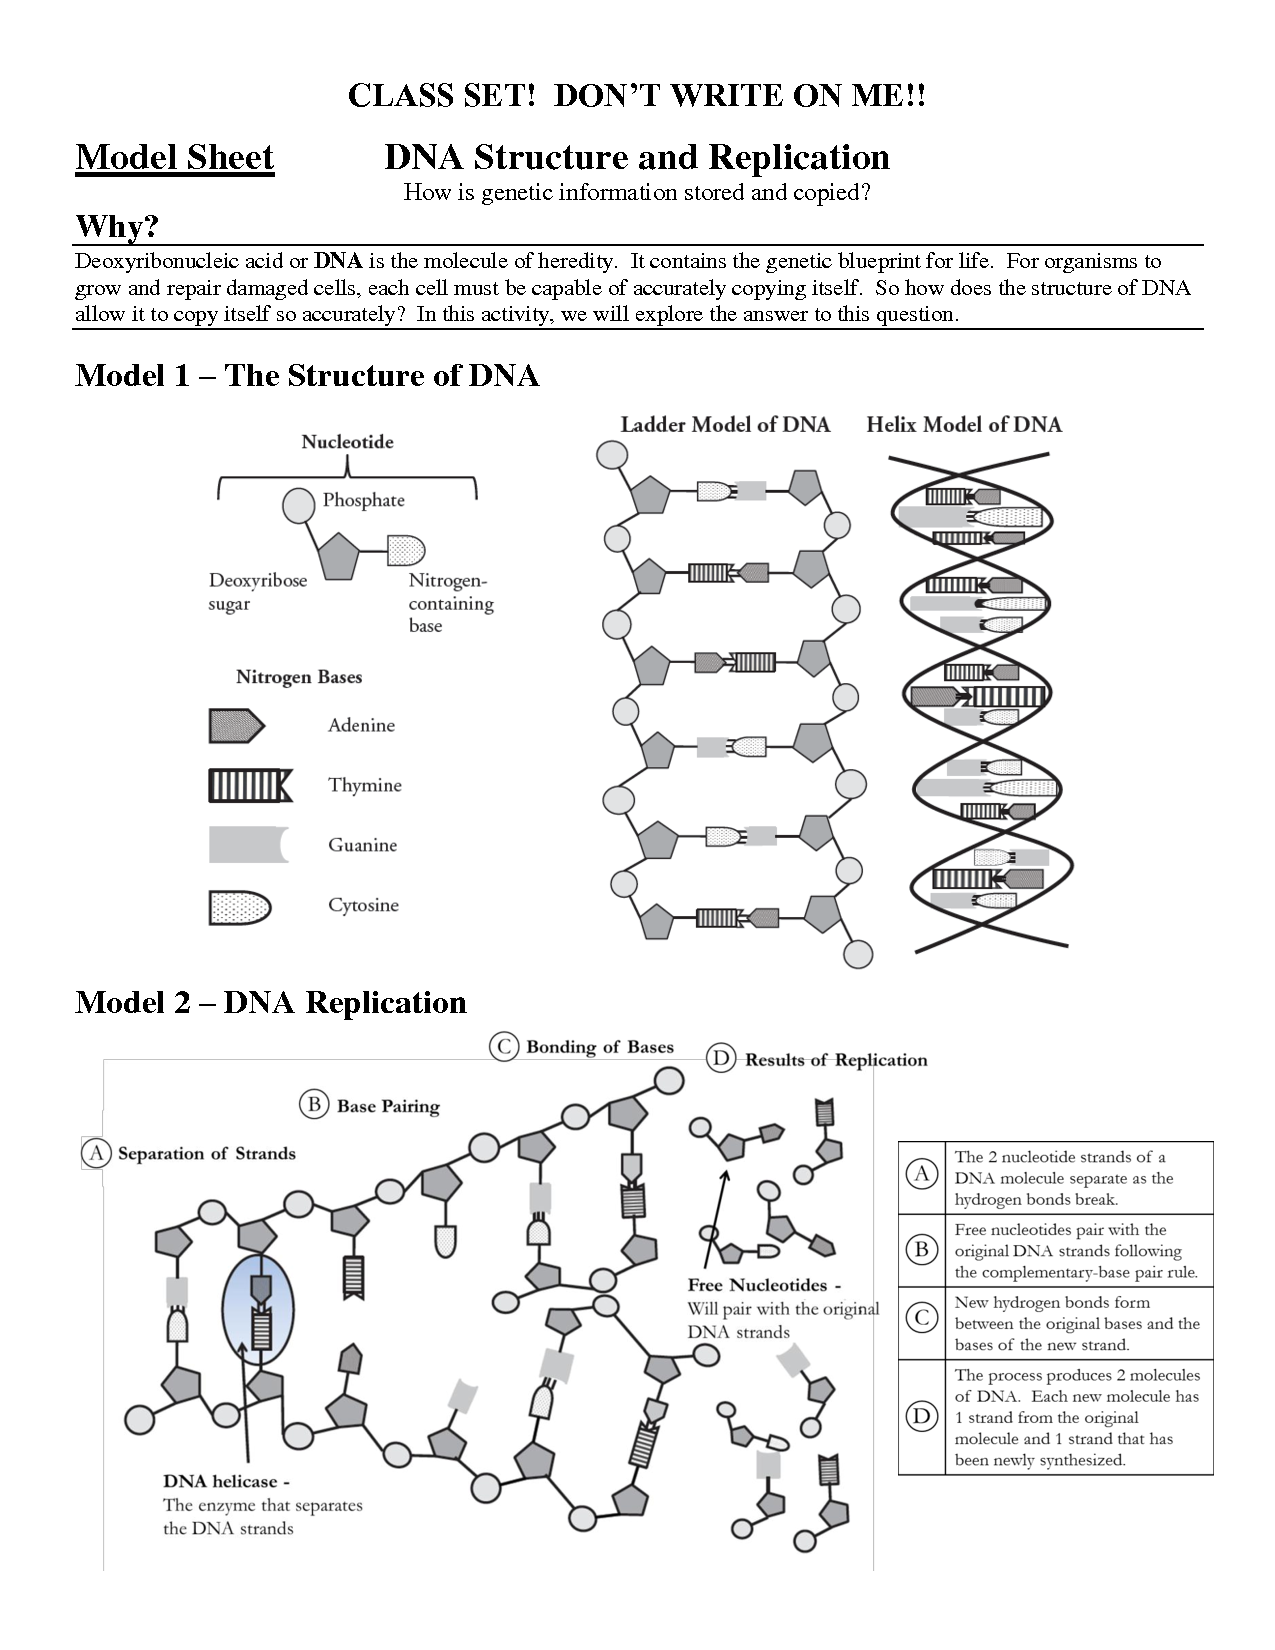 DNA Structure and Replication Answer Key POGIL Image